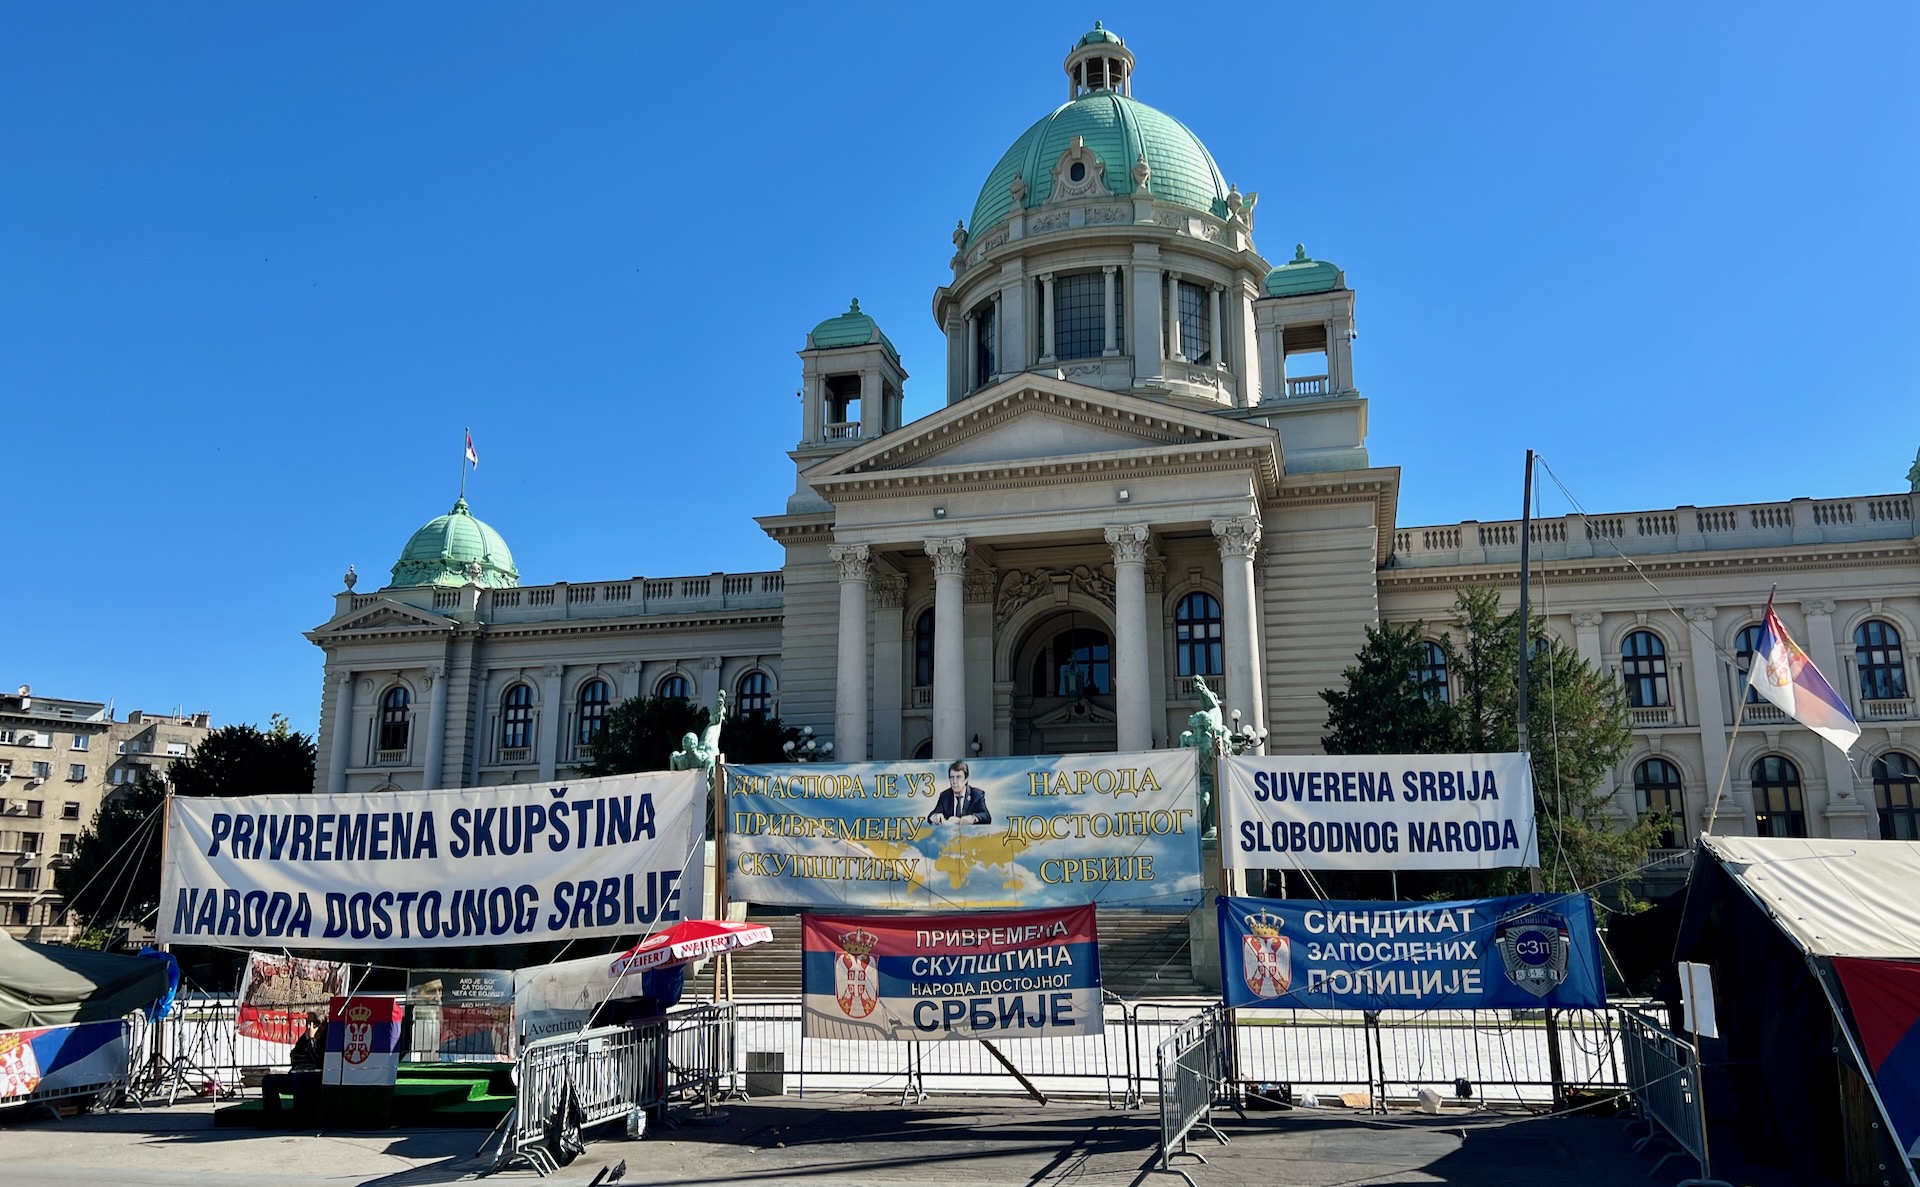 Protest outside of a civic building. The text here translates to “Provisional Assembly of the Dignified People of Serbia.”